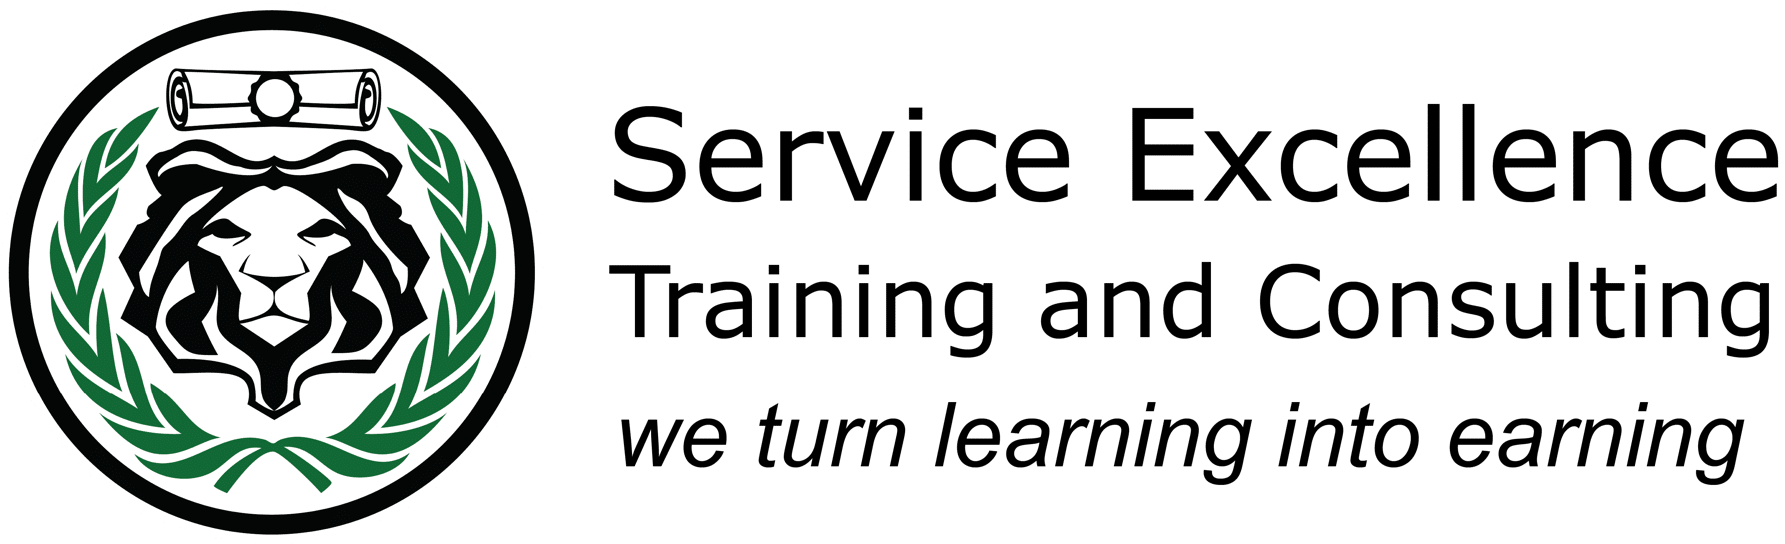 Service Excellence Training and Consulting logo